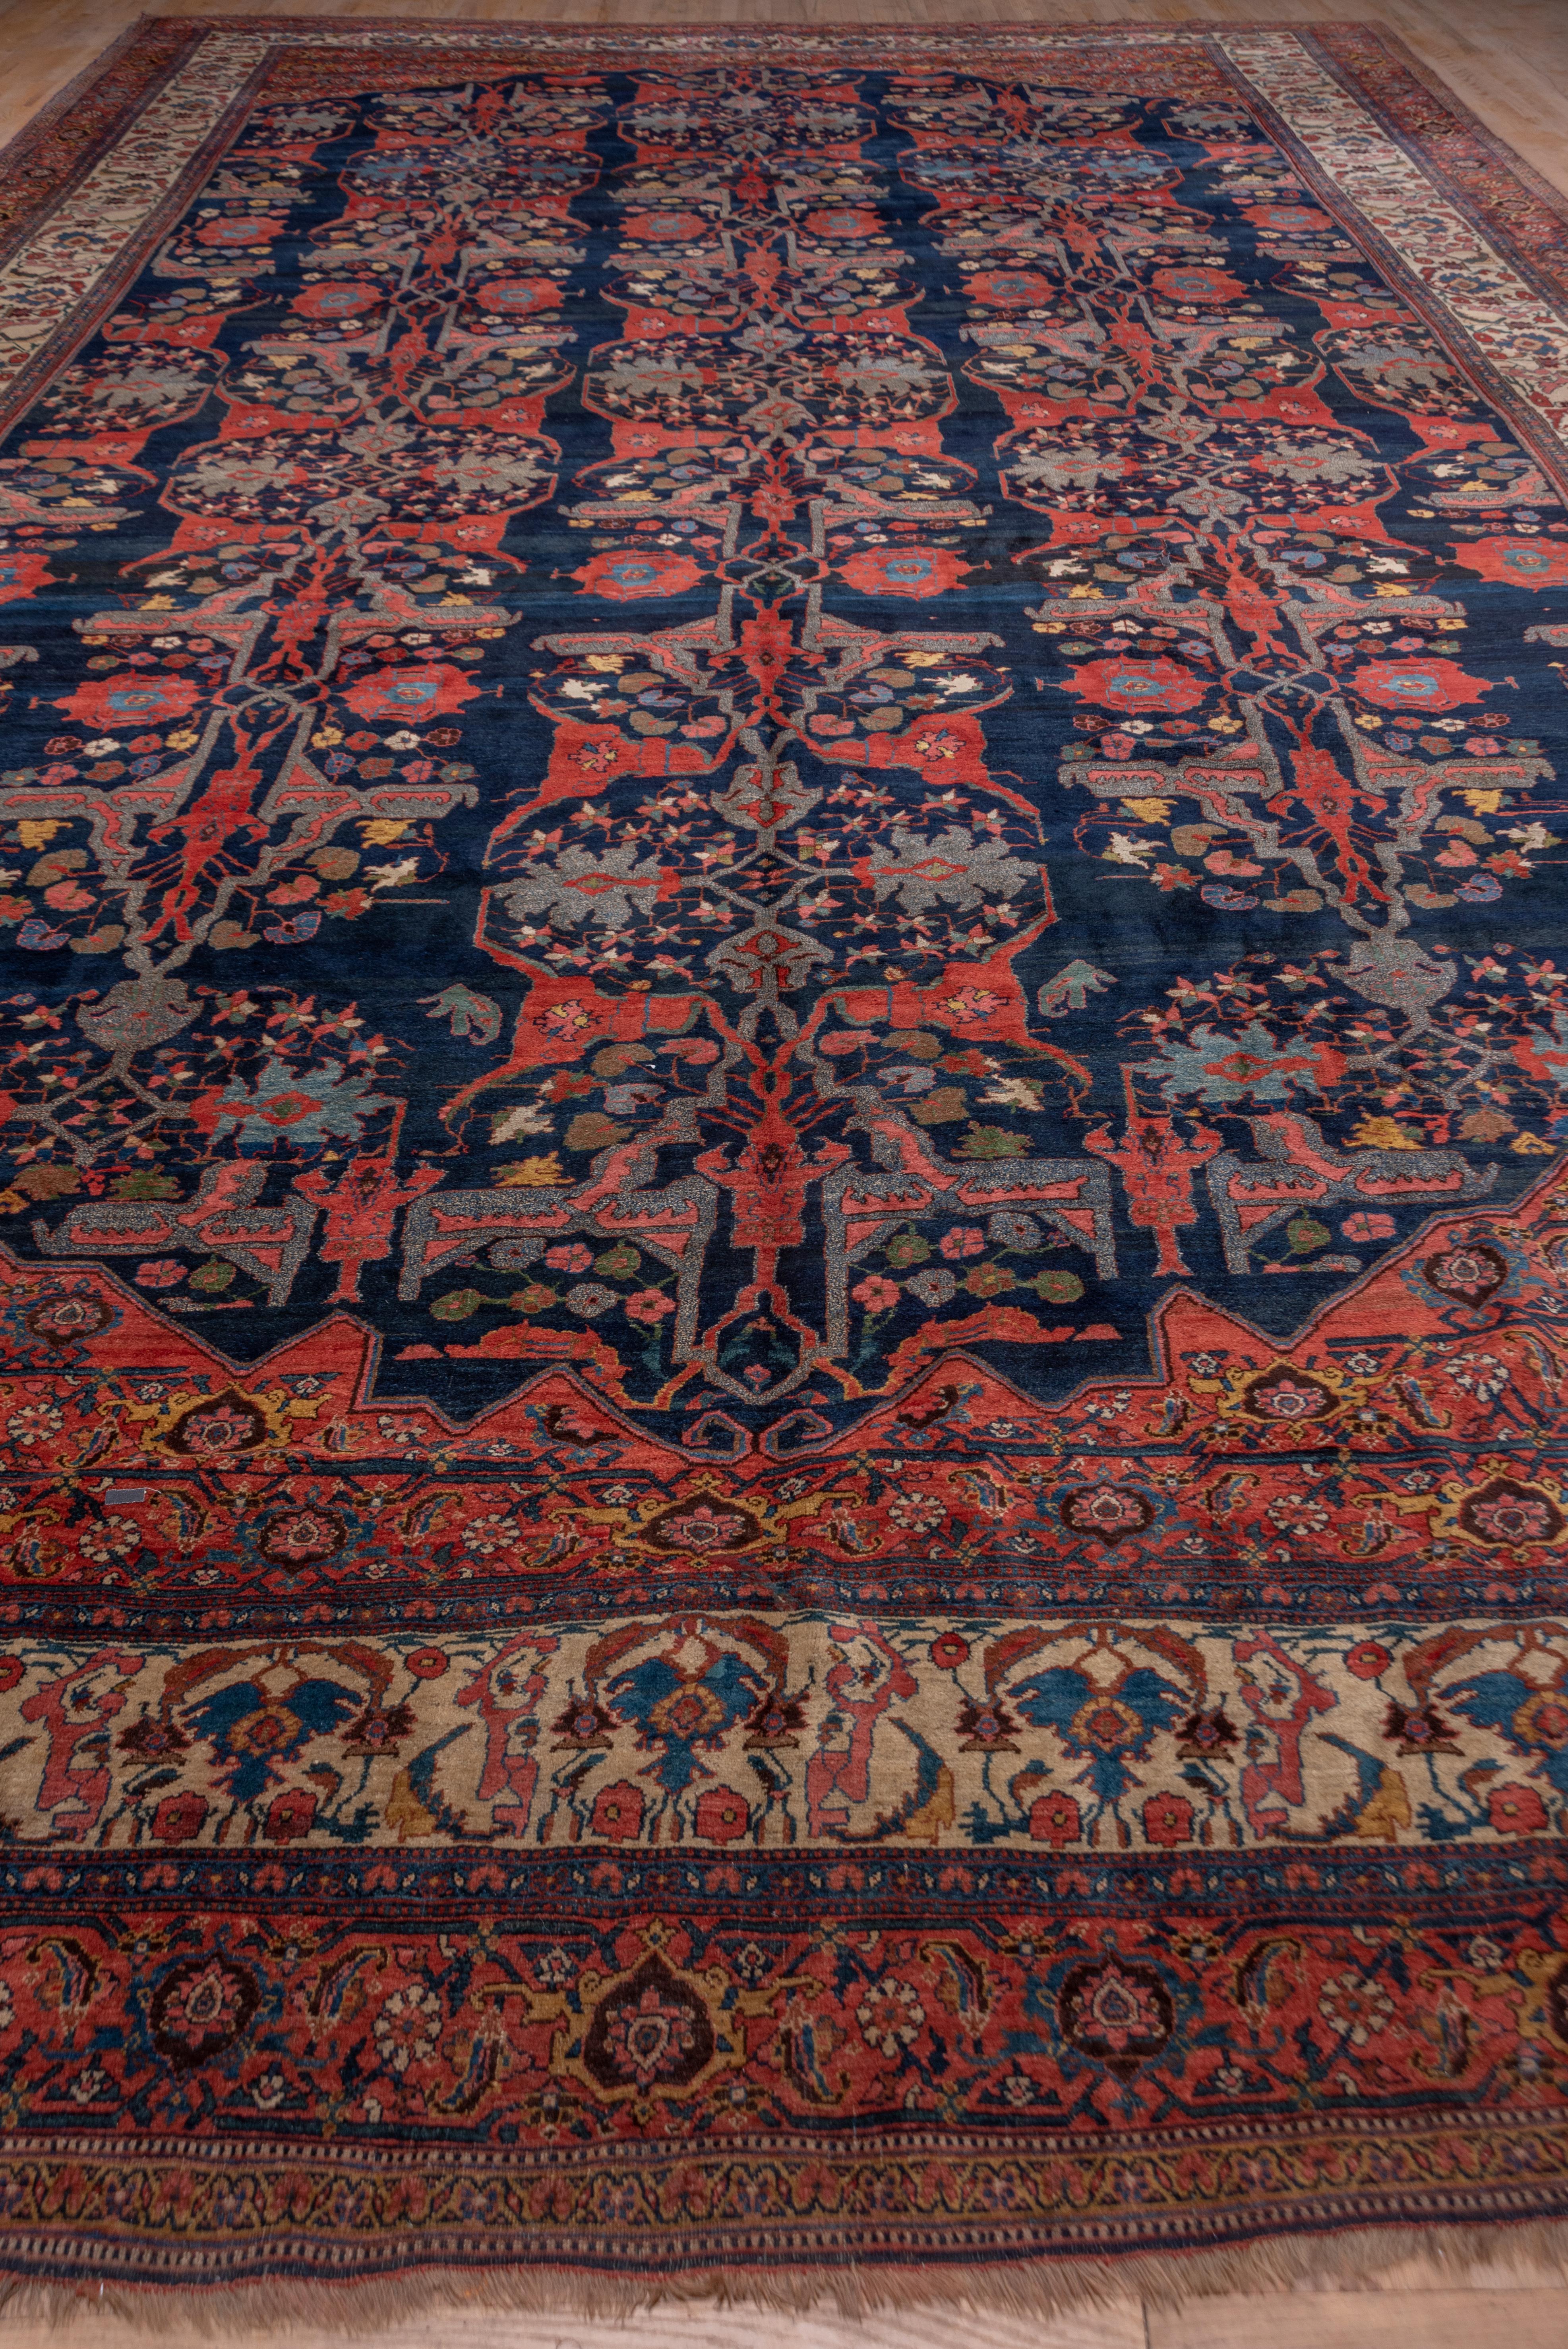 This important Kurdish city carpet displays a Garrus red forked arabesque pattern with palmettes in teal on a navy blue ground. The pattern is organized in three distinct columns rather than strictly all-over. The red corners present repeated turtle